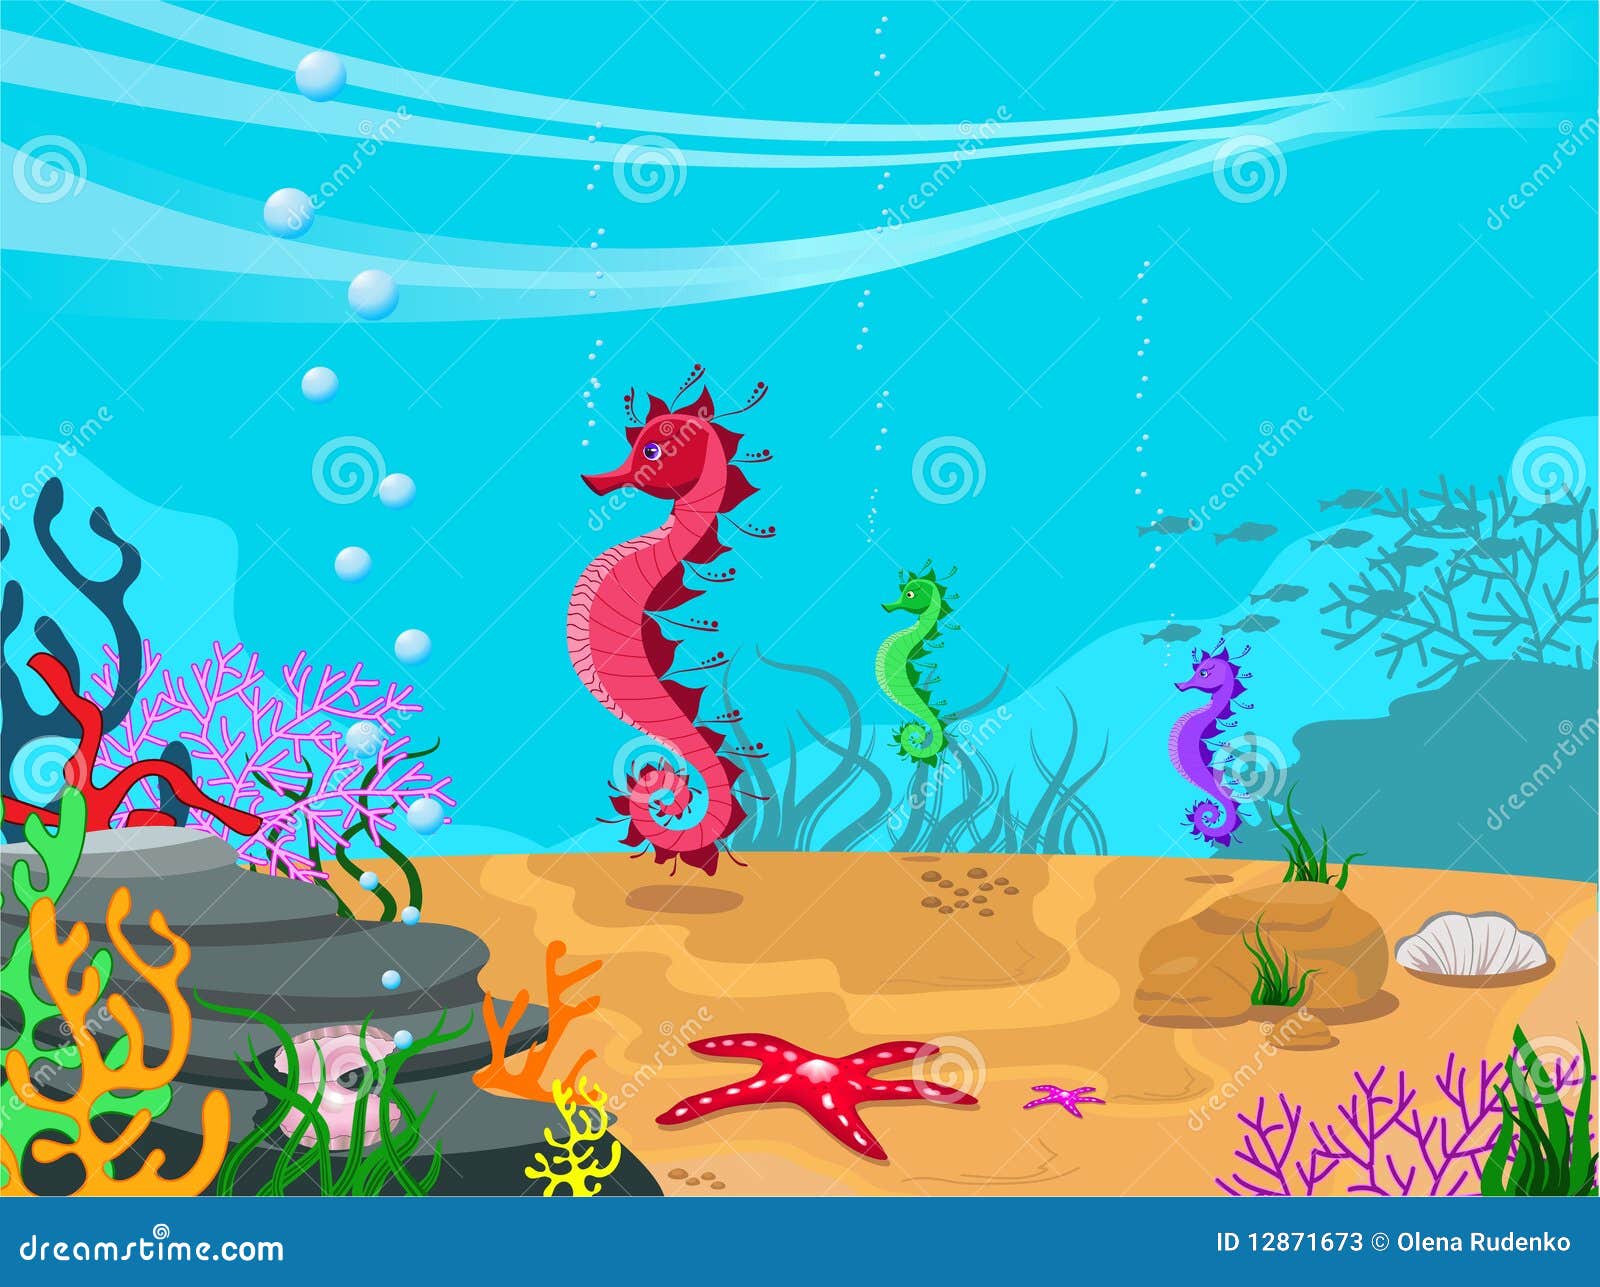 Vector Illustration Of The Seabed Stock Photos - Image: 12871673